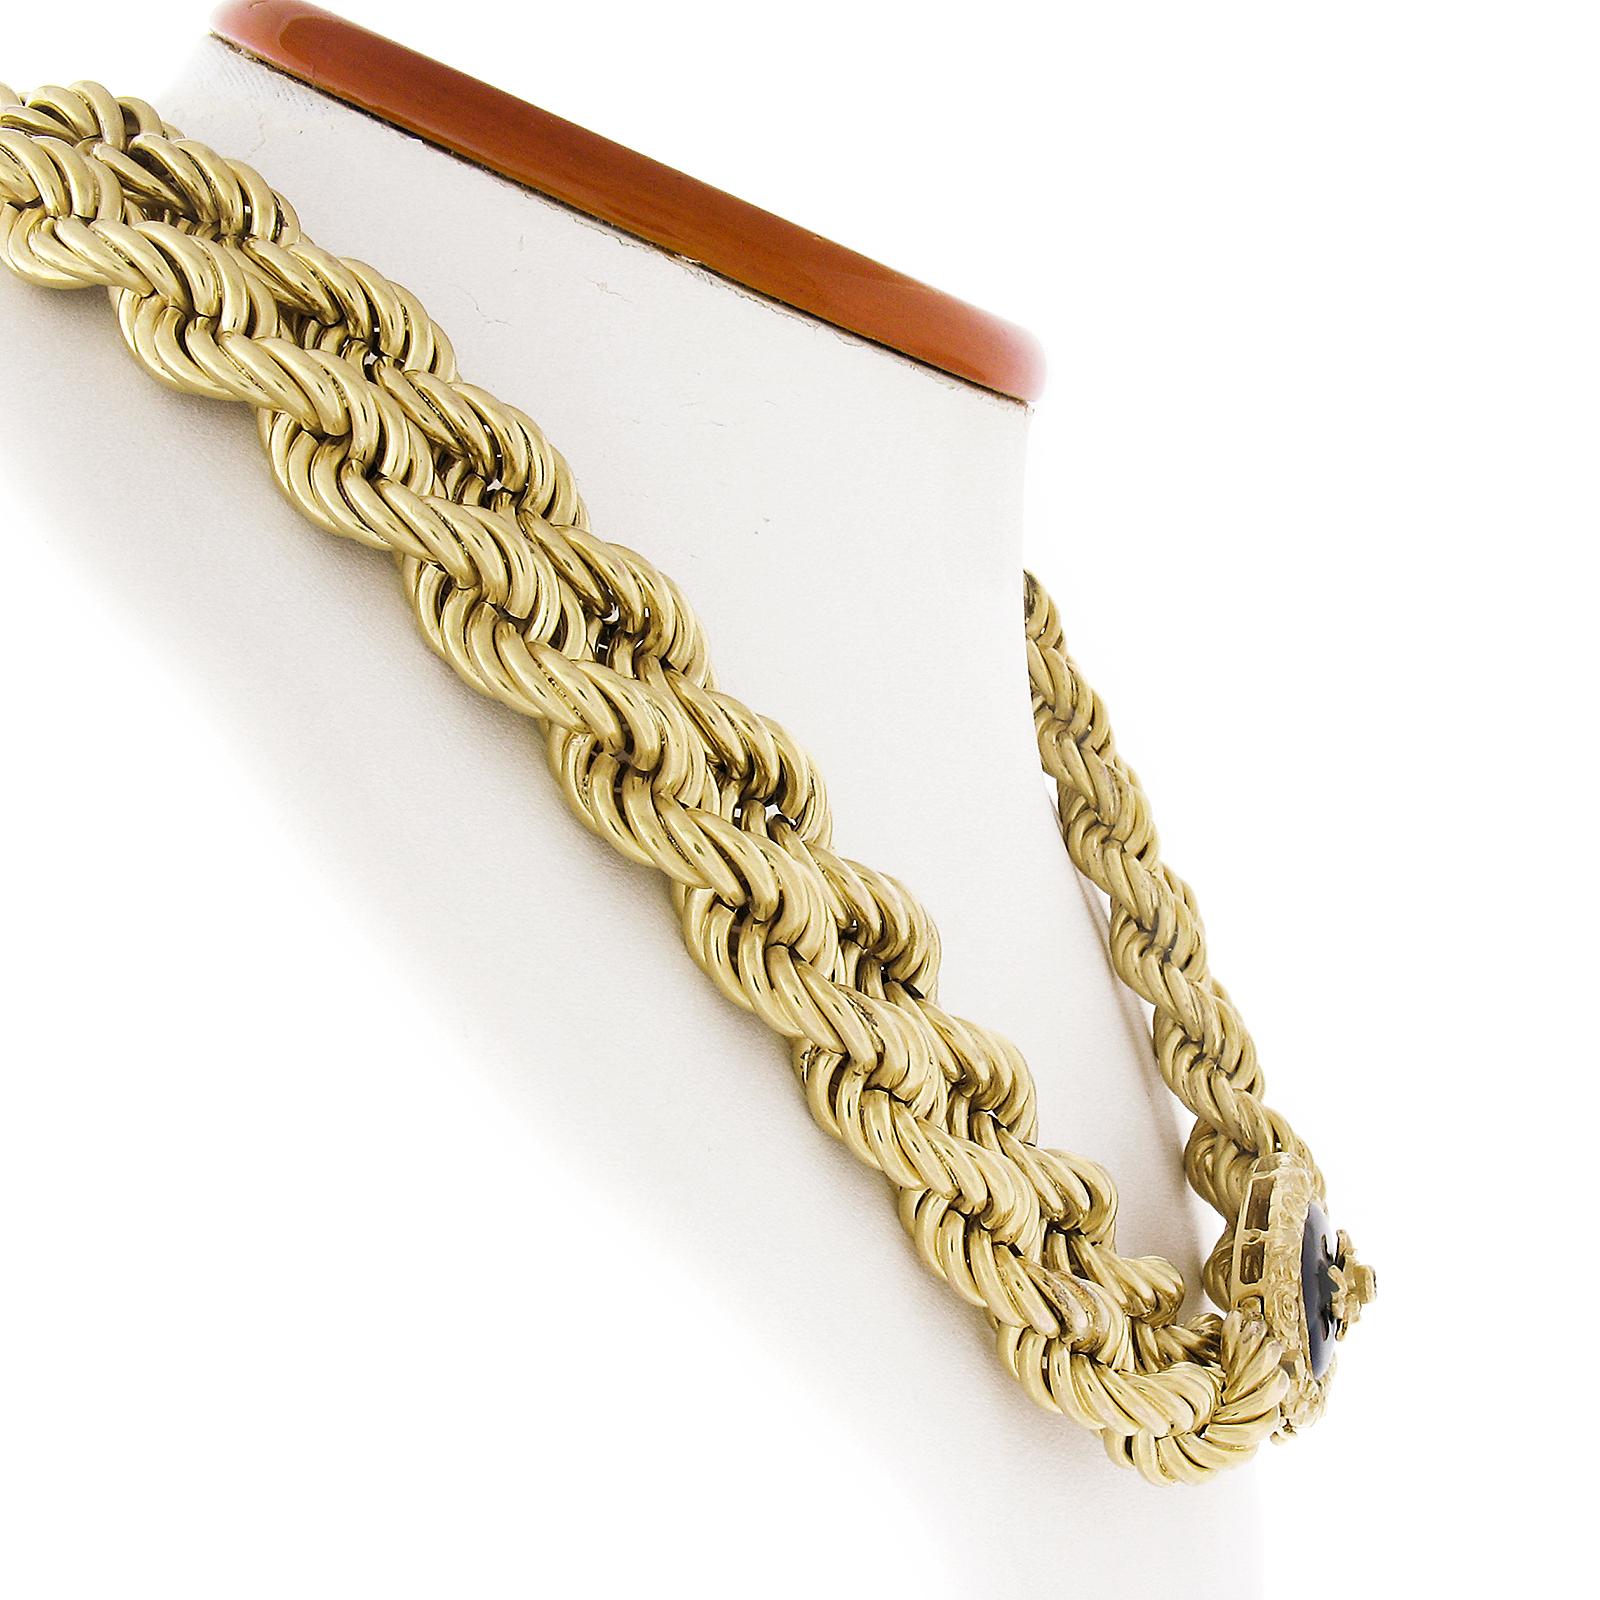 10mm gold rope chain 14k